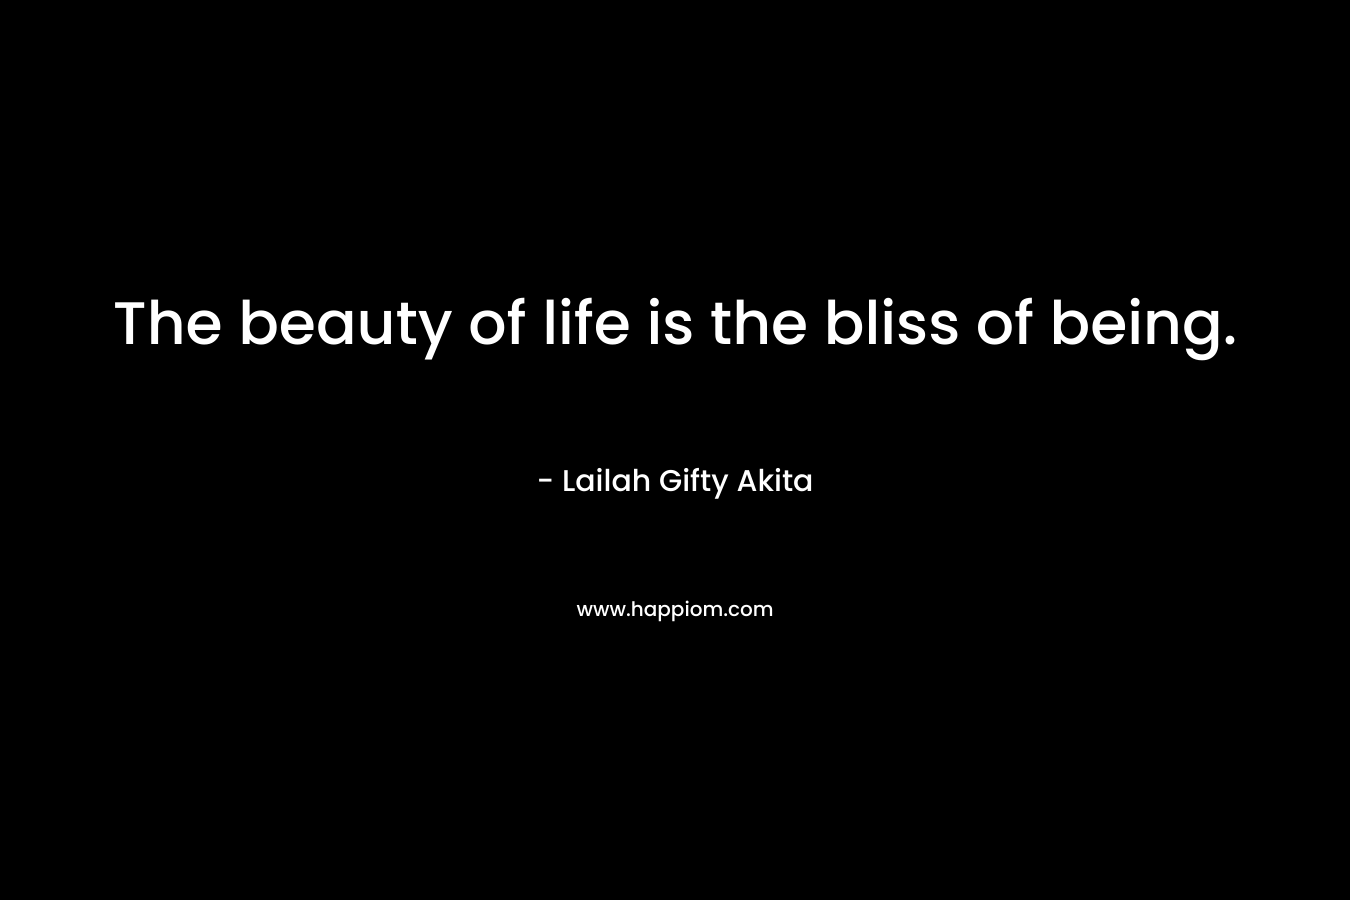 The beauty of life is the bliss of being.